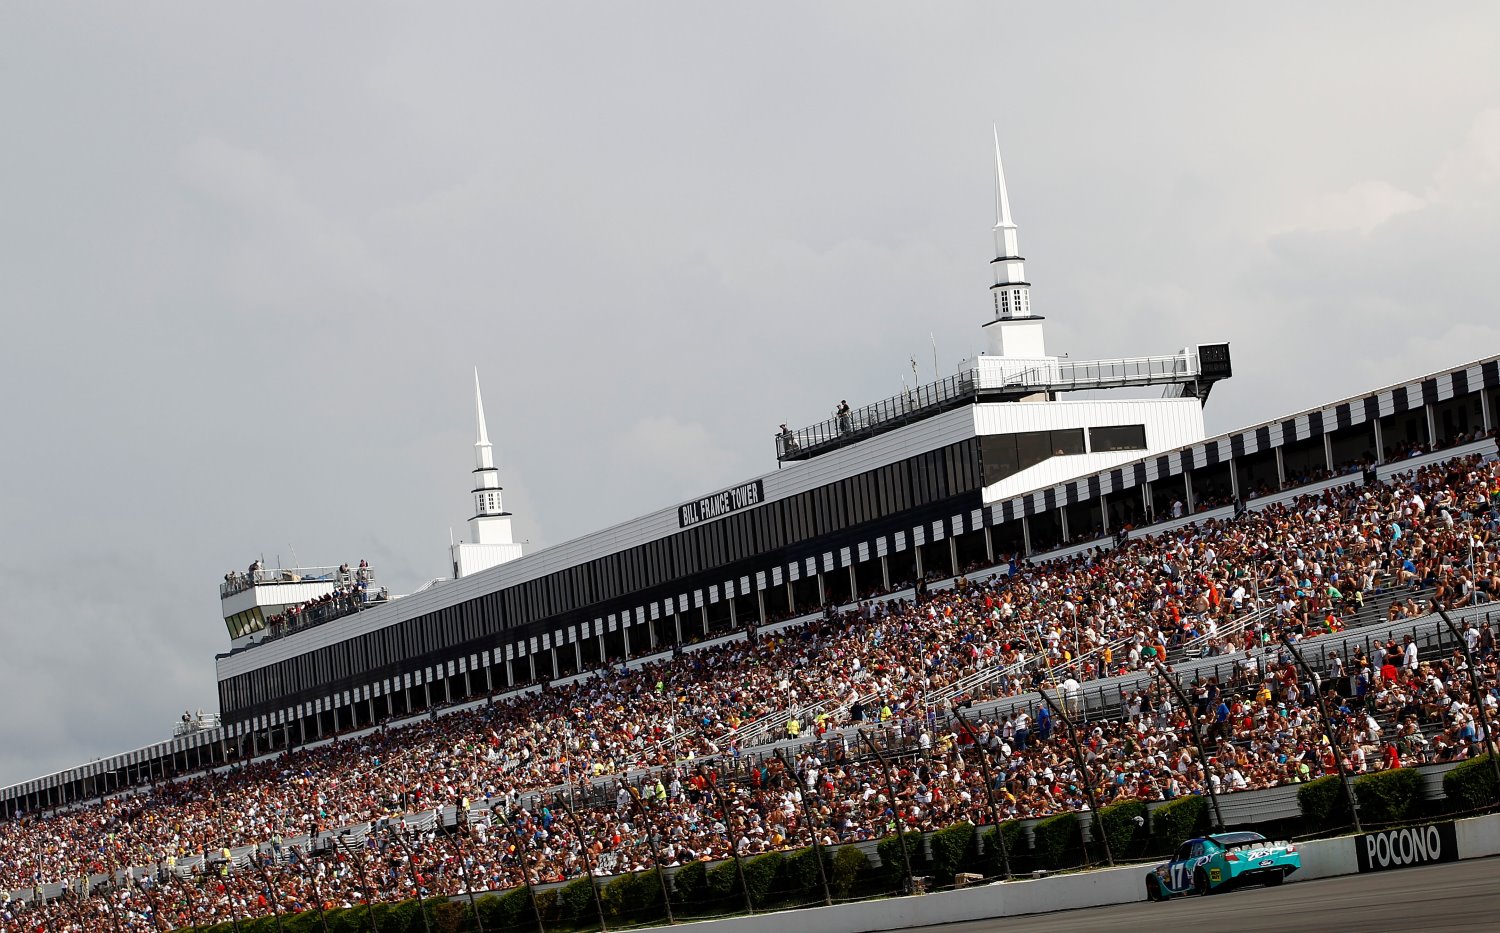 Pocono gets solid crowds for its two races each 5 weeks apart